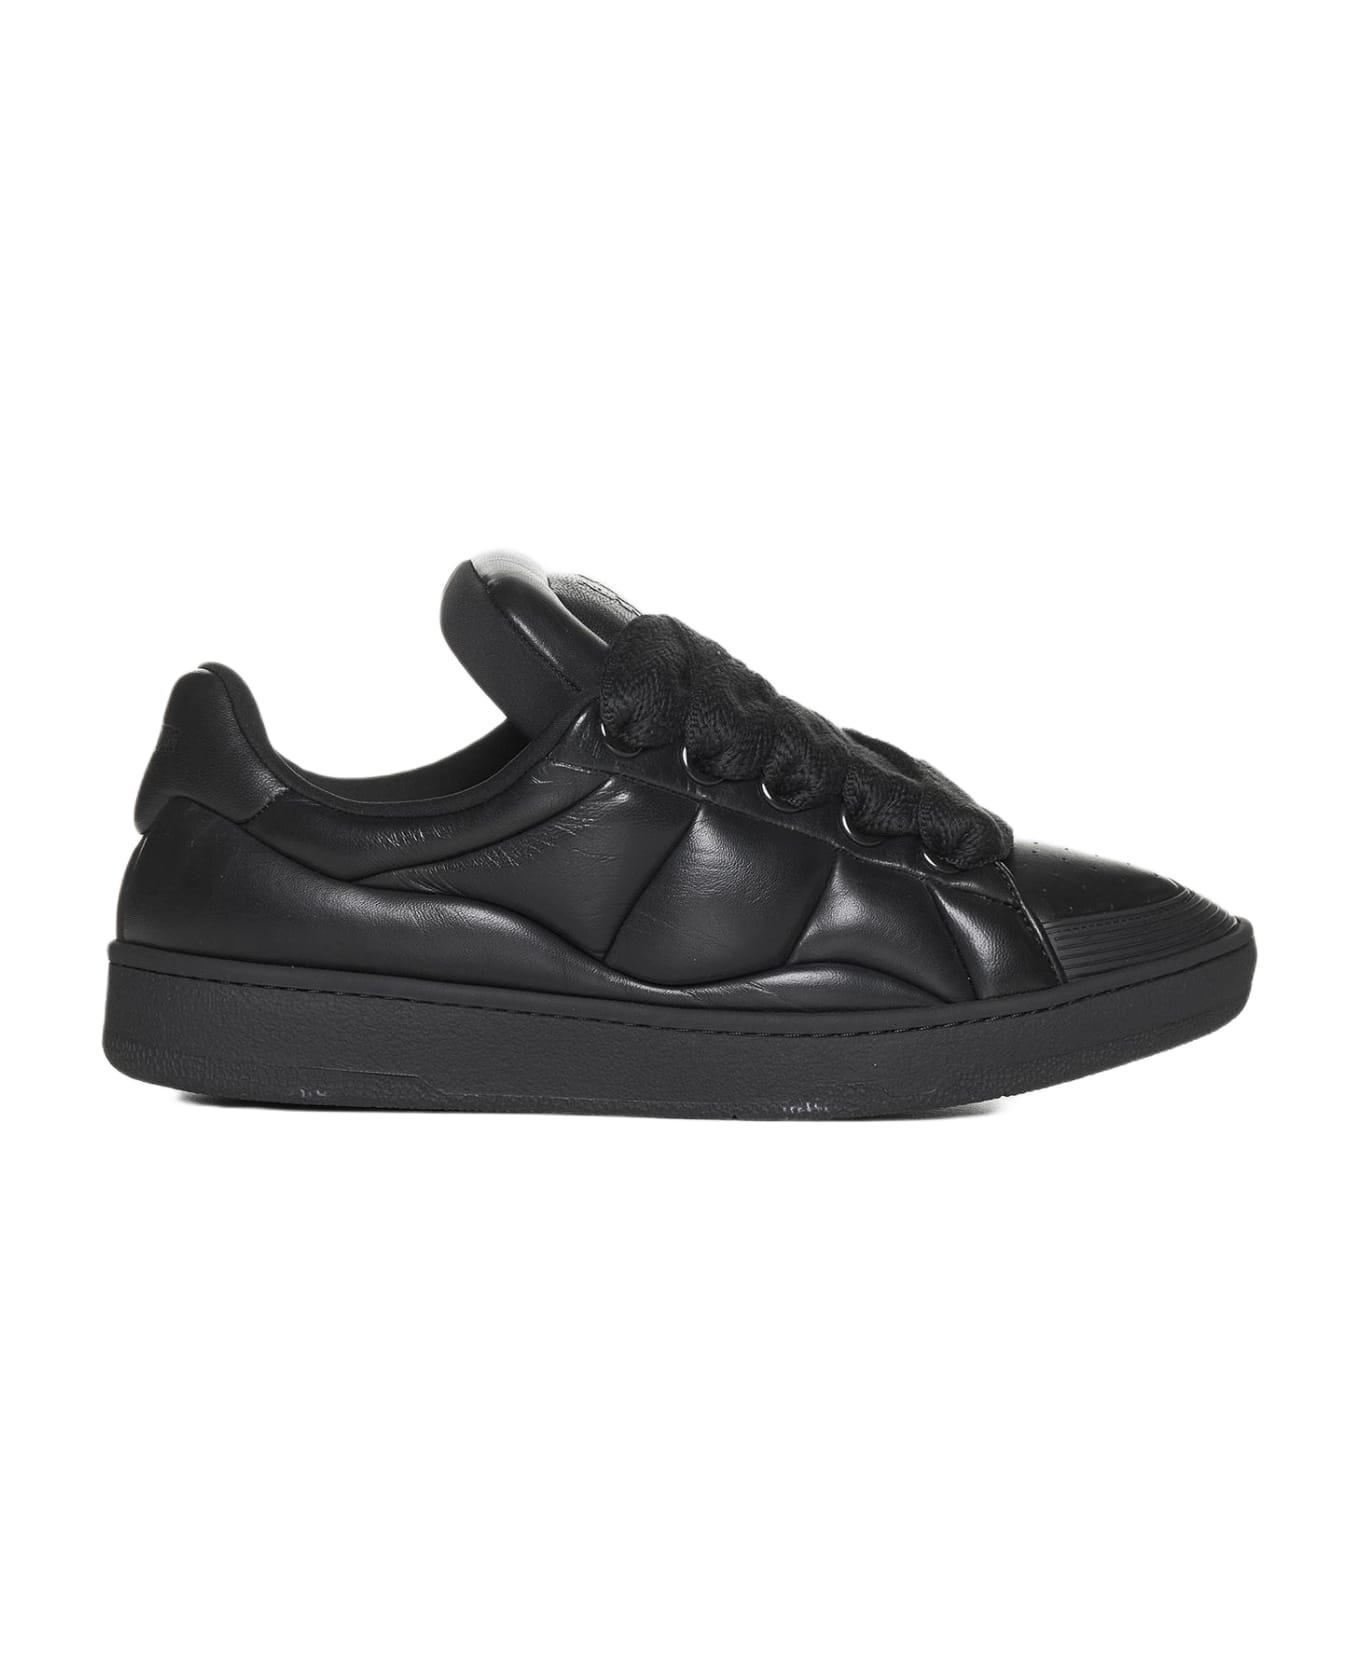 Lanvin Curb Xl Low-top Leather Sneakers - Black